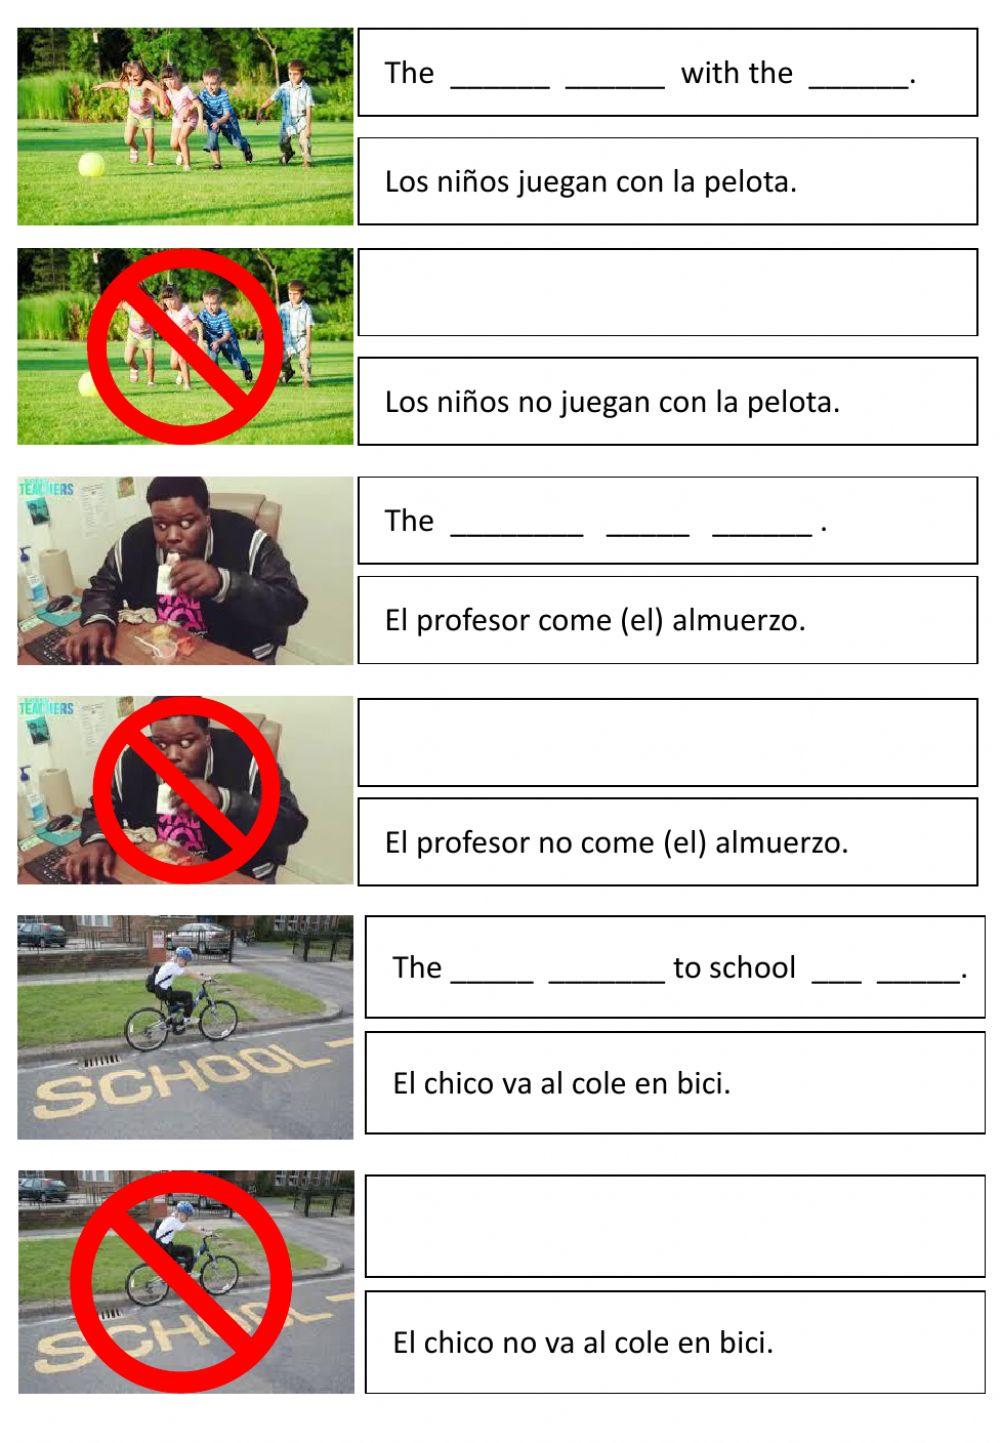 Do-does vs don't-doesn't + school vocab (3 - Primaria)